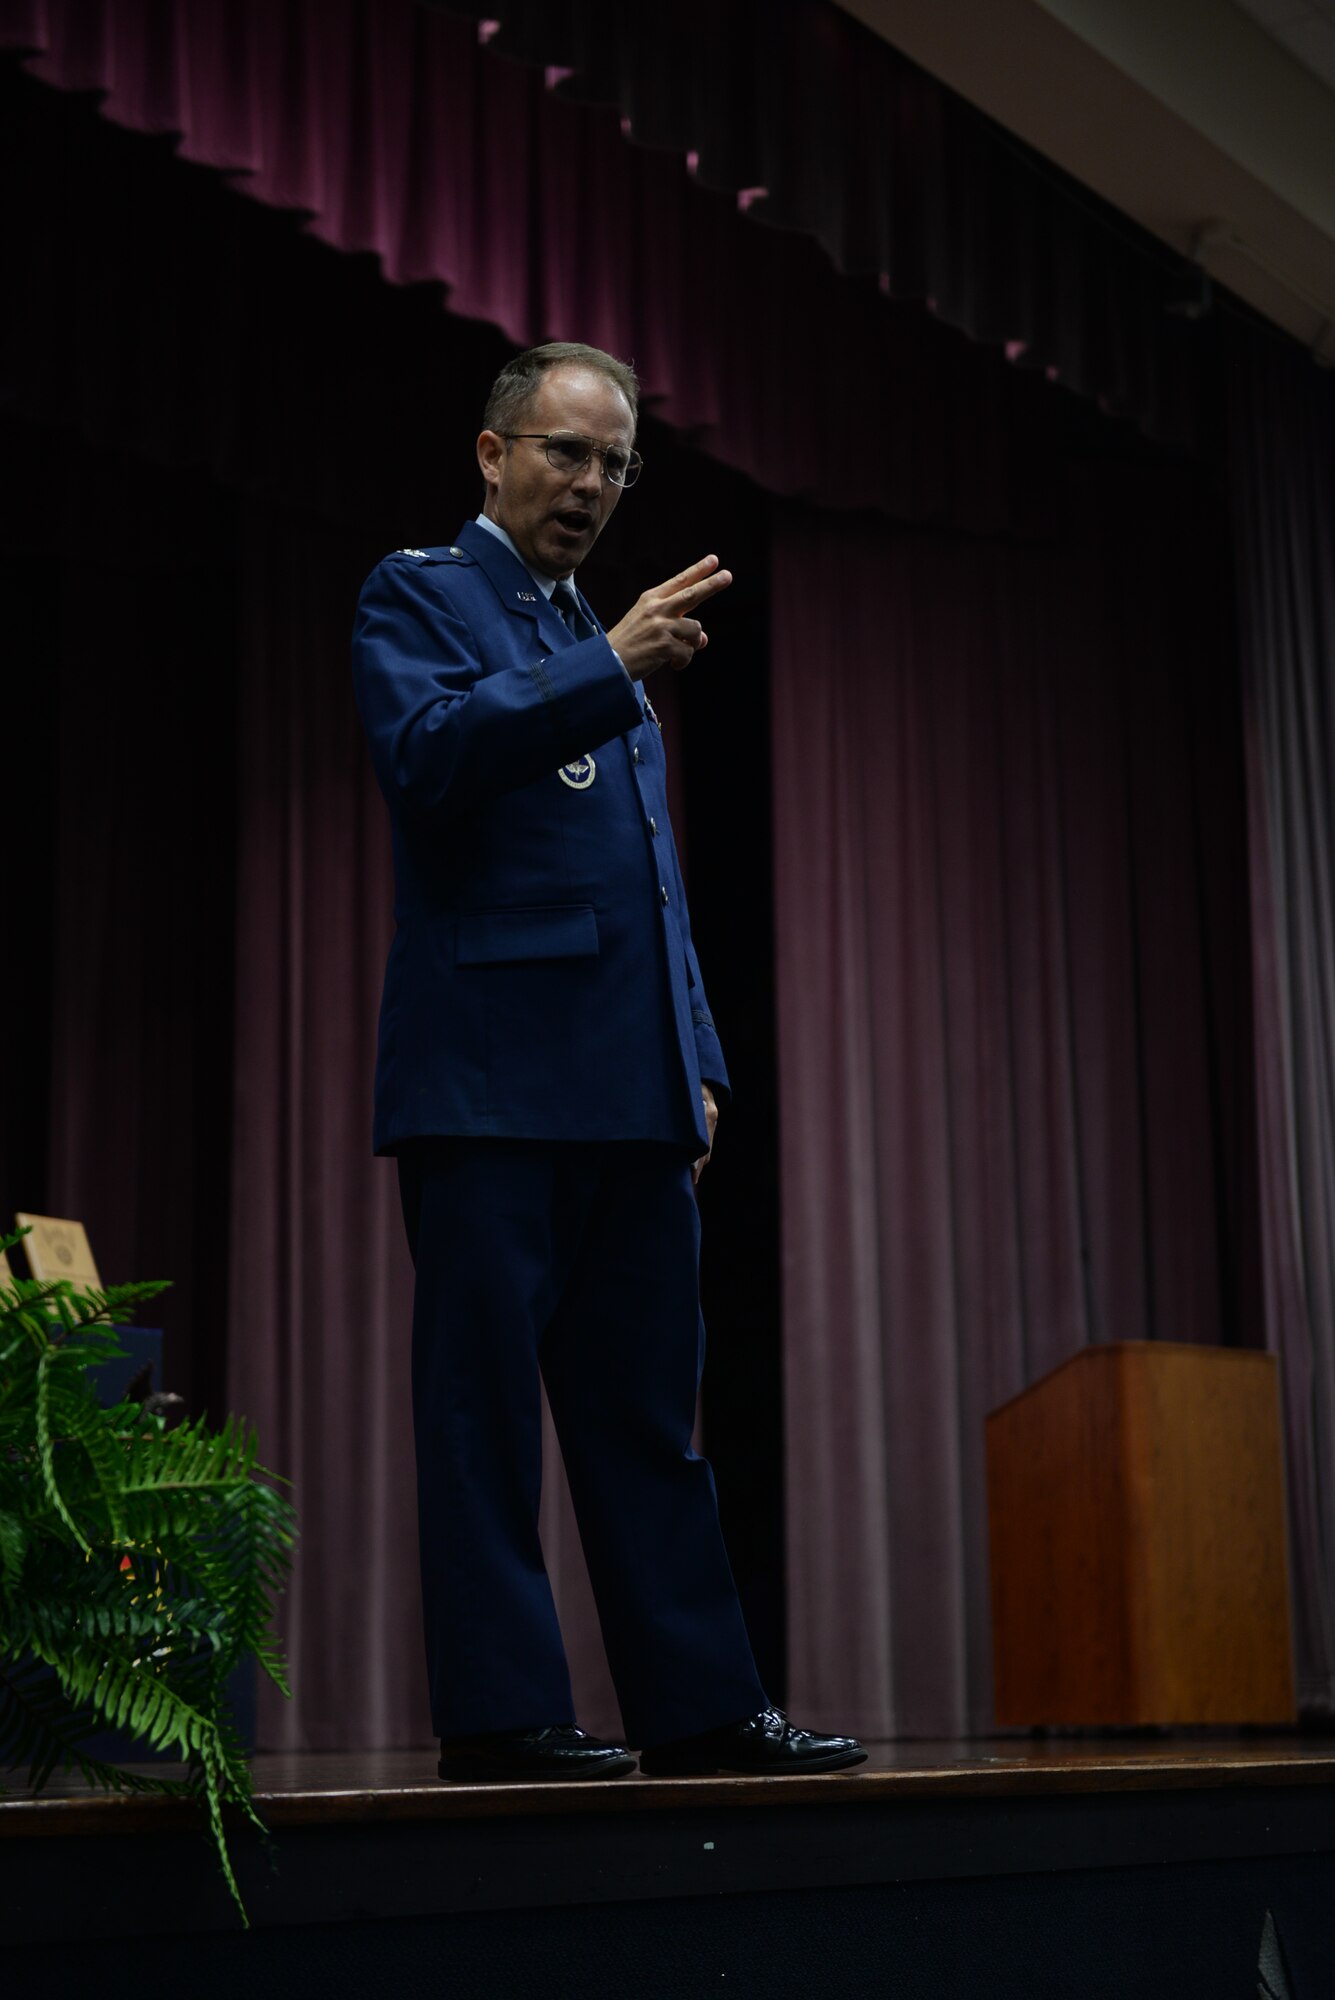 Col. Dean Lee, Director of Safety, Air Education and Training Command, Joint Base San Antonio-Randolph, Texas, speaks to the 16 graduates of Specialized Undergraduate Pilot Training Class 17-08 April 28, 2017, at
the Kaye Auditorium on Columbus Air Force Base, Mississippi. Lee gave the graduates three pillars of wisdom to have a successful career as an Air Force pilot. (U.S. Air Force photo by Senior Airman John Day)